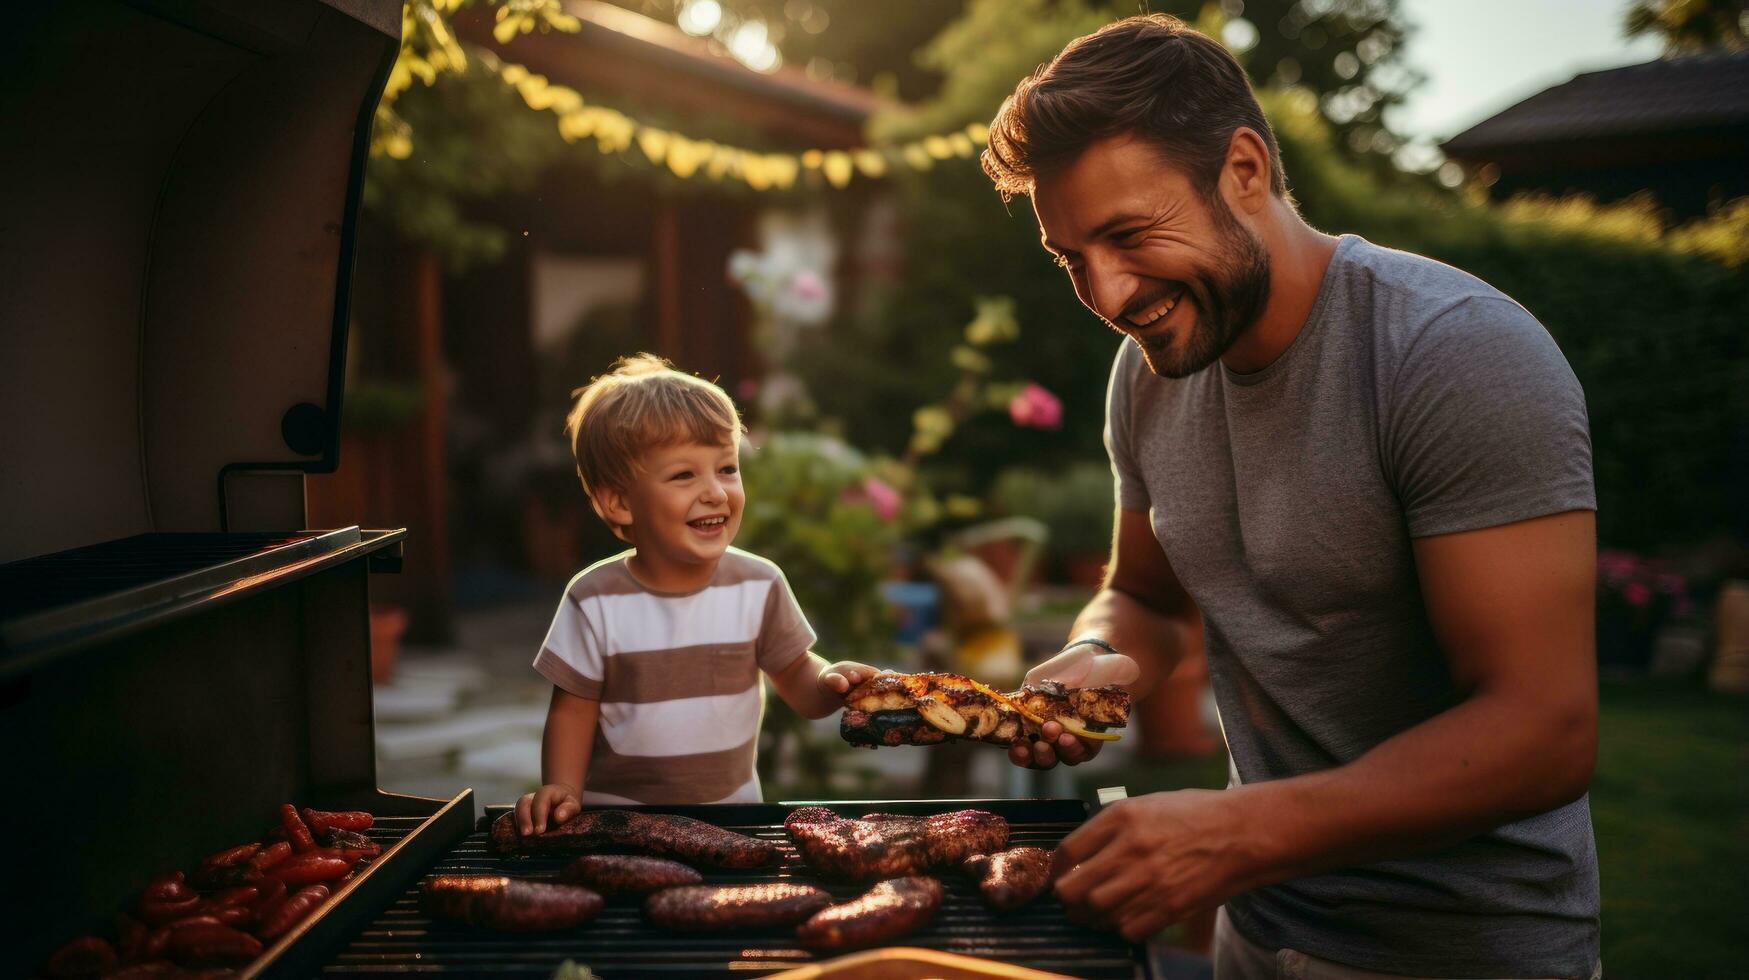 Father and son grilling burgers in backyard photo